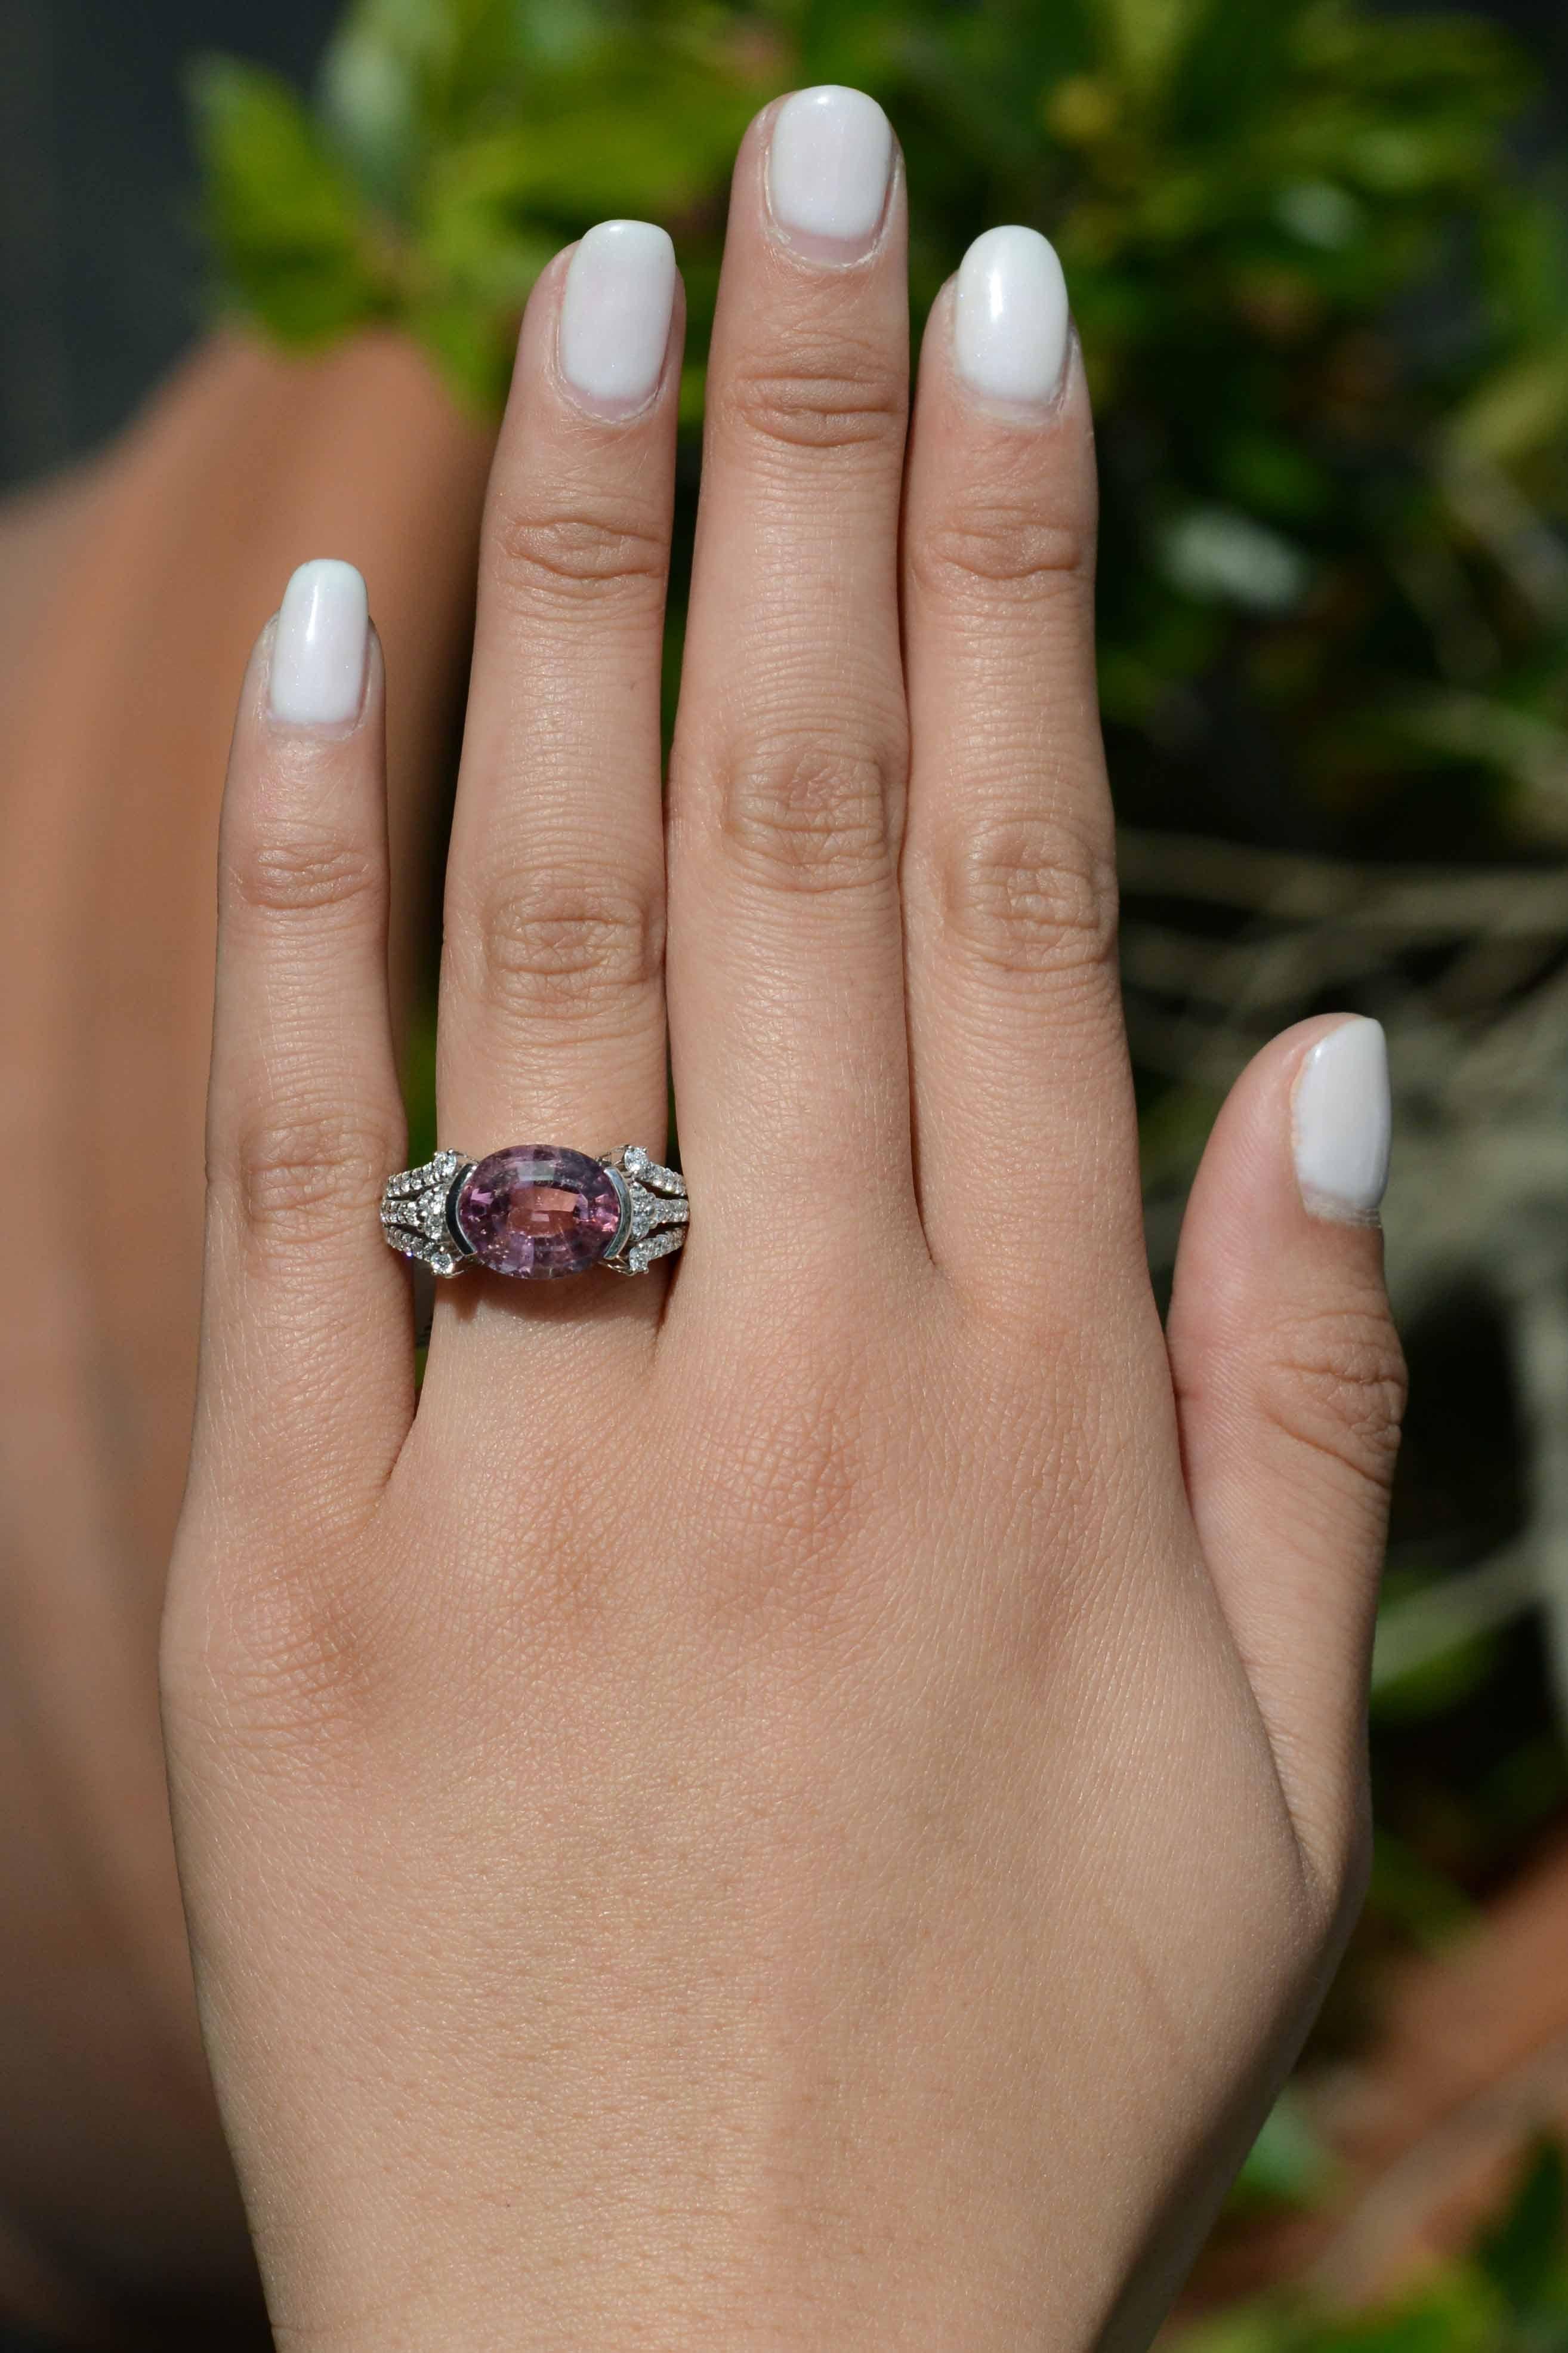 This east to west style ring features a stunning 7 carat pink tourmaline and 38 round cut diamonds. The tourmaline is a blush pink color with orange glistens throughout. The rows of pave' set diamonds emanate from the center and taper effortlessly